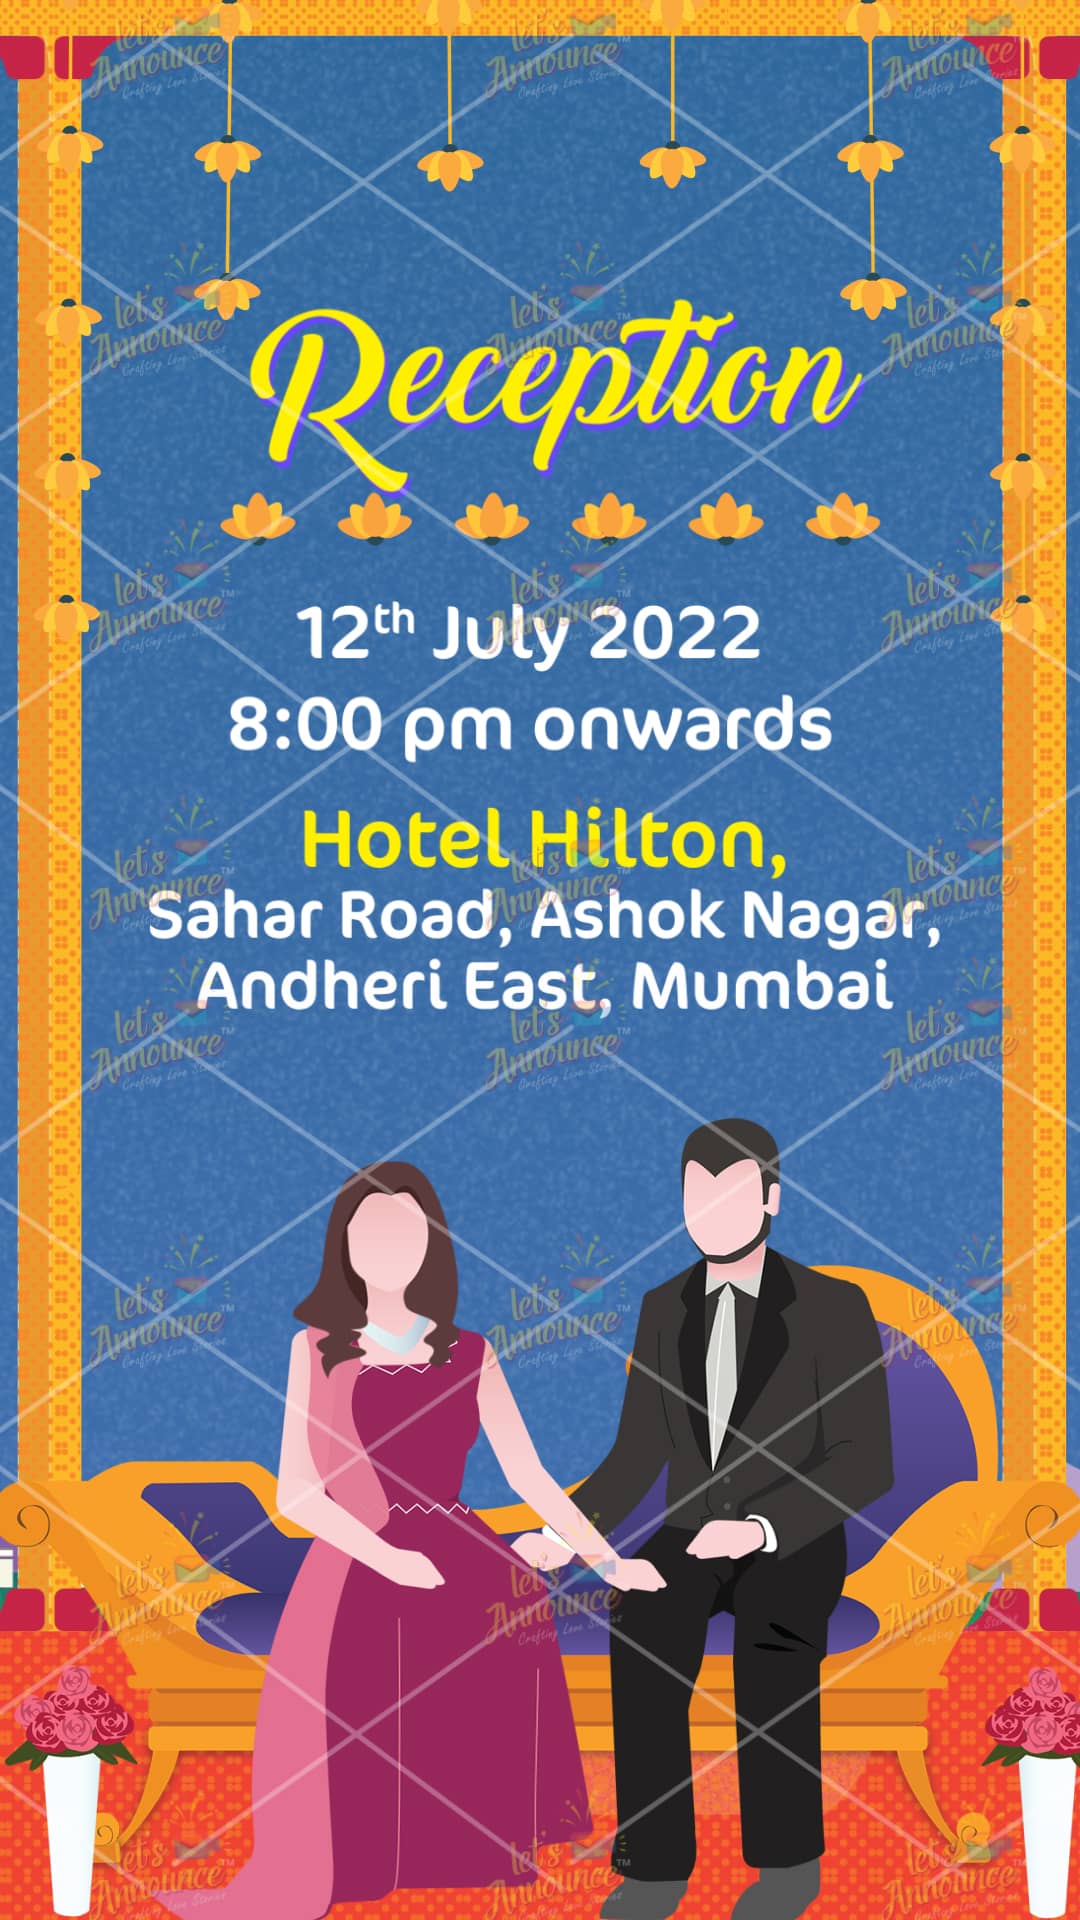 The Awesome indian wedding invite Vertical-87 sec (USD 100$)